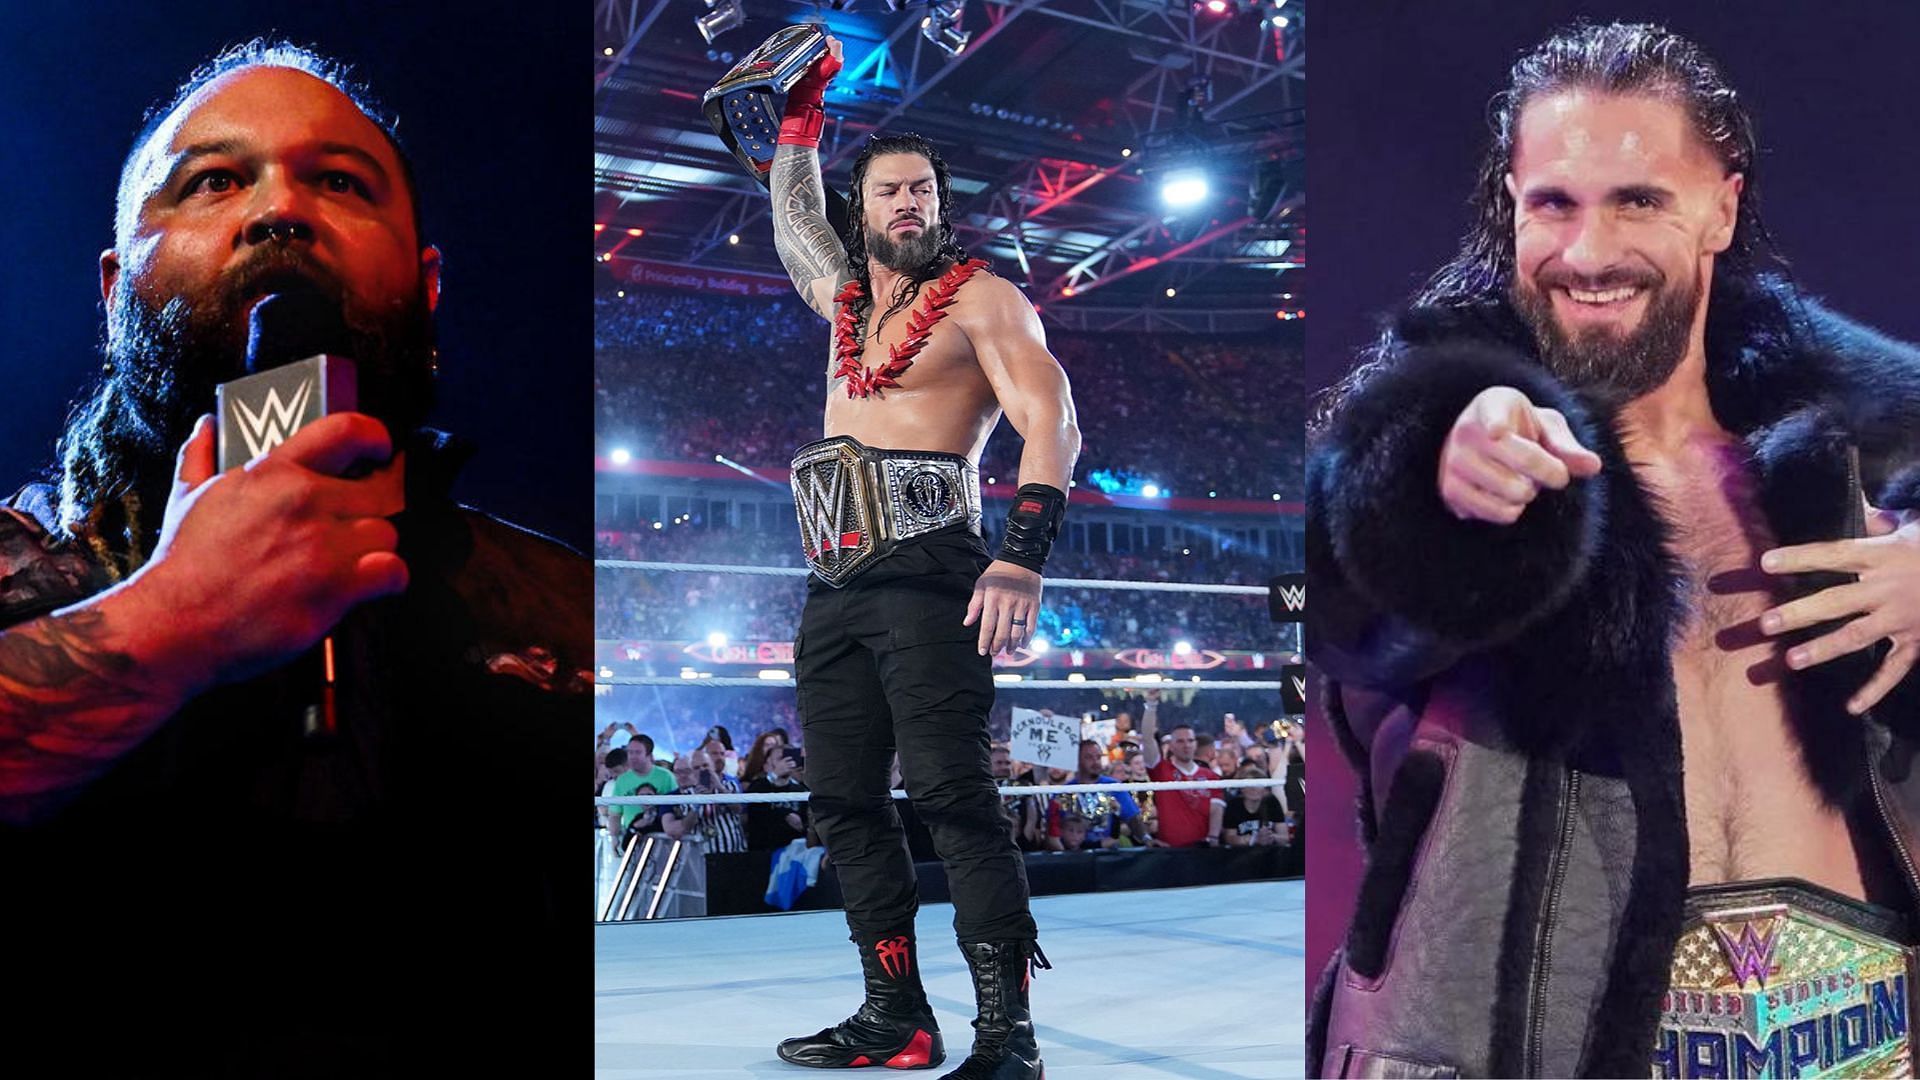 Who would you like to see Roman Reigns face at Royal Rumble 2023?